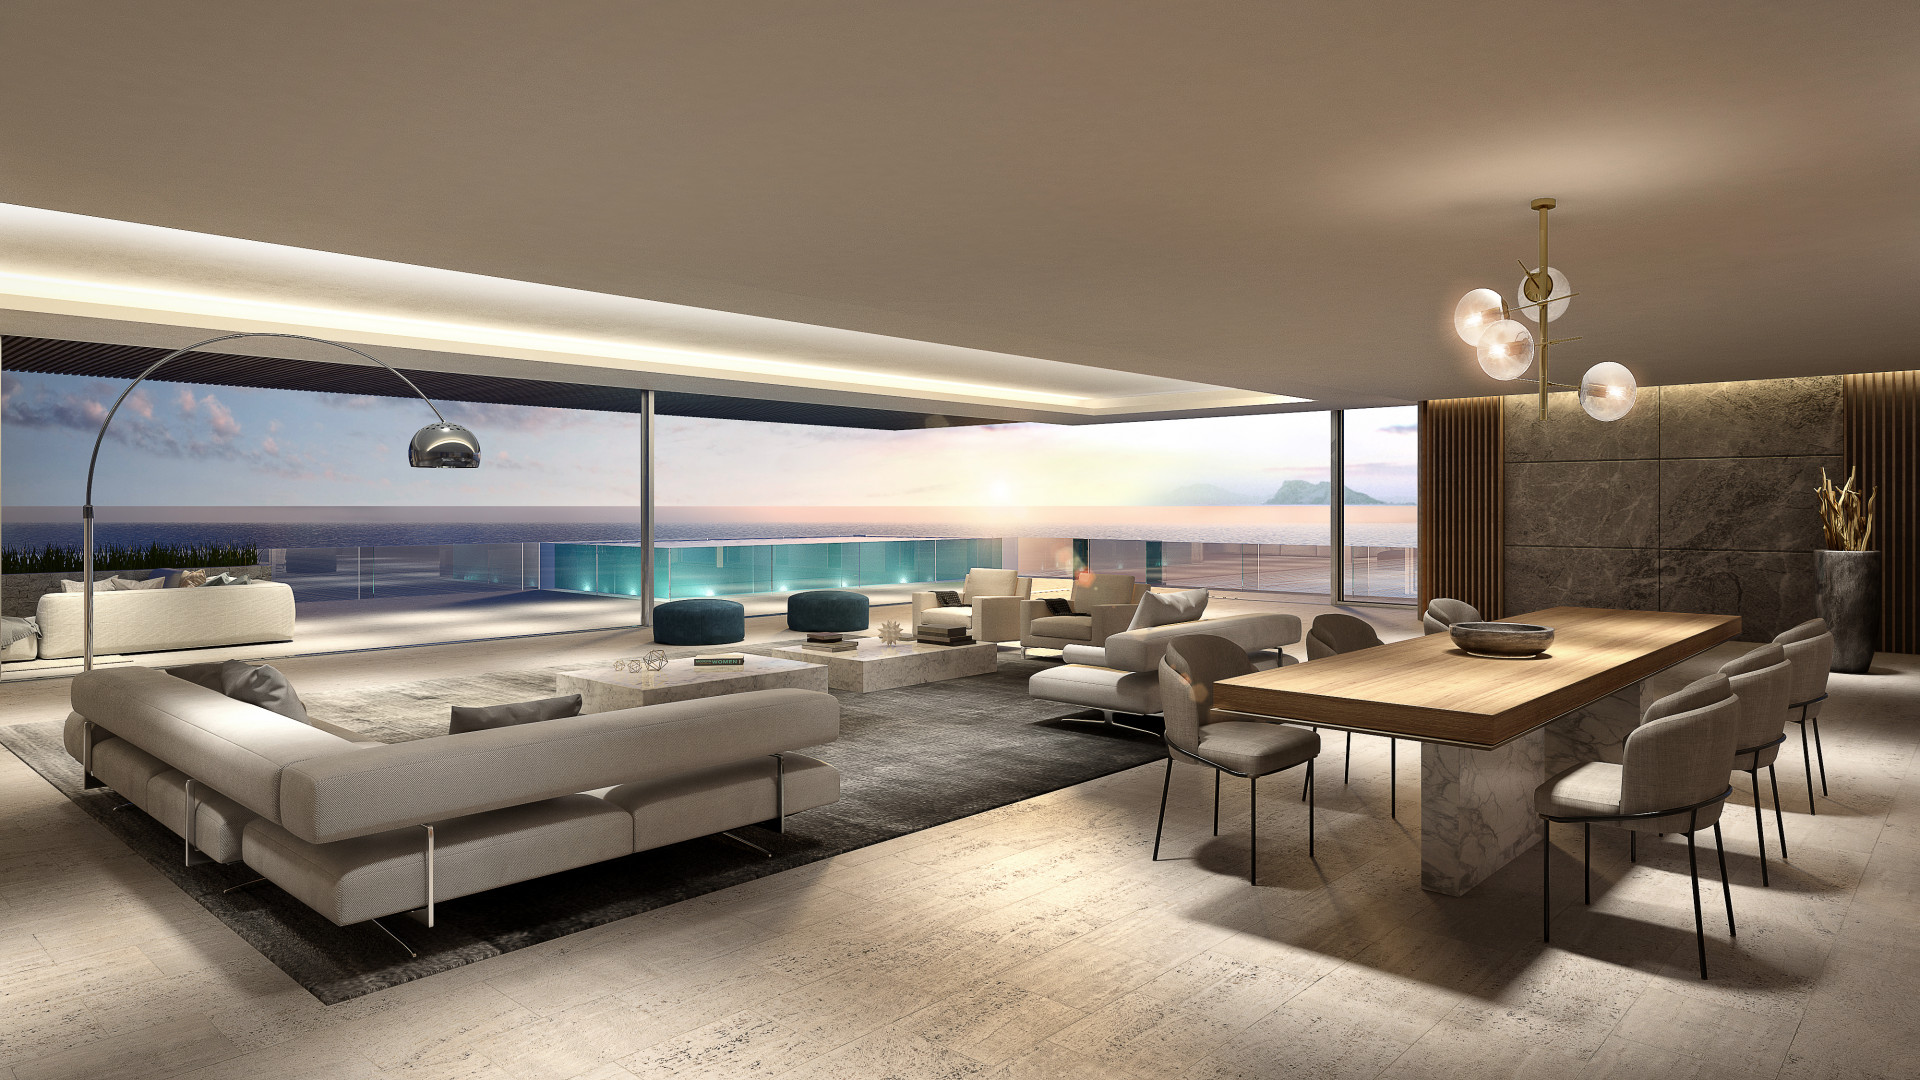 Ikkil Bay: Luxury residential project of nine homes with ocean views in Estepona. | Image 3